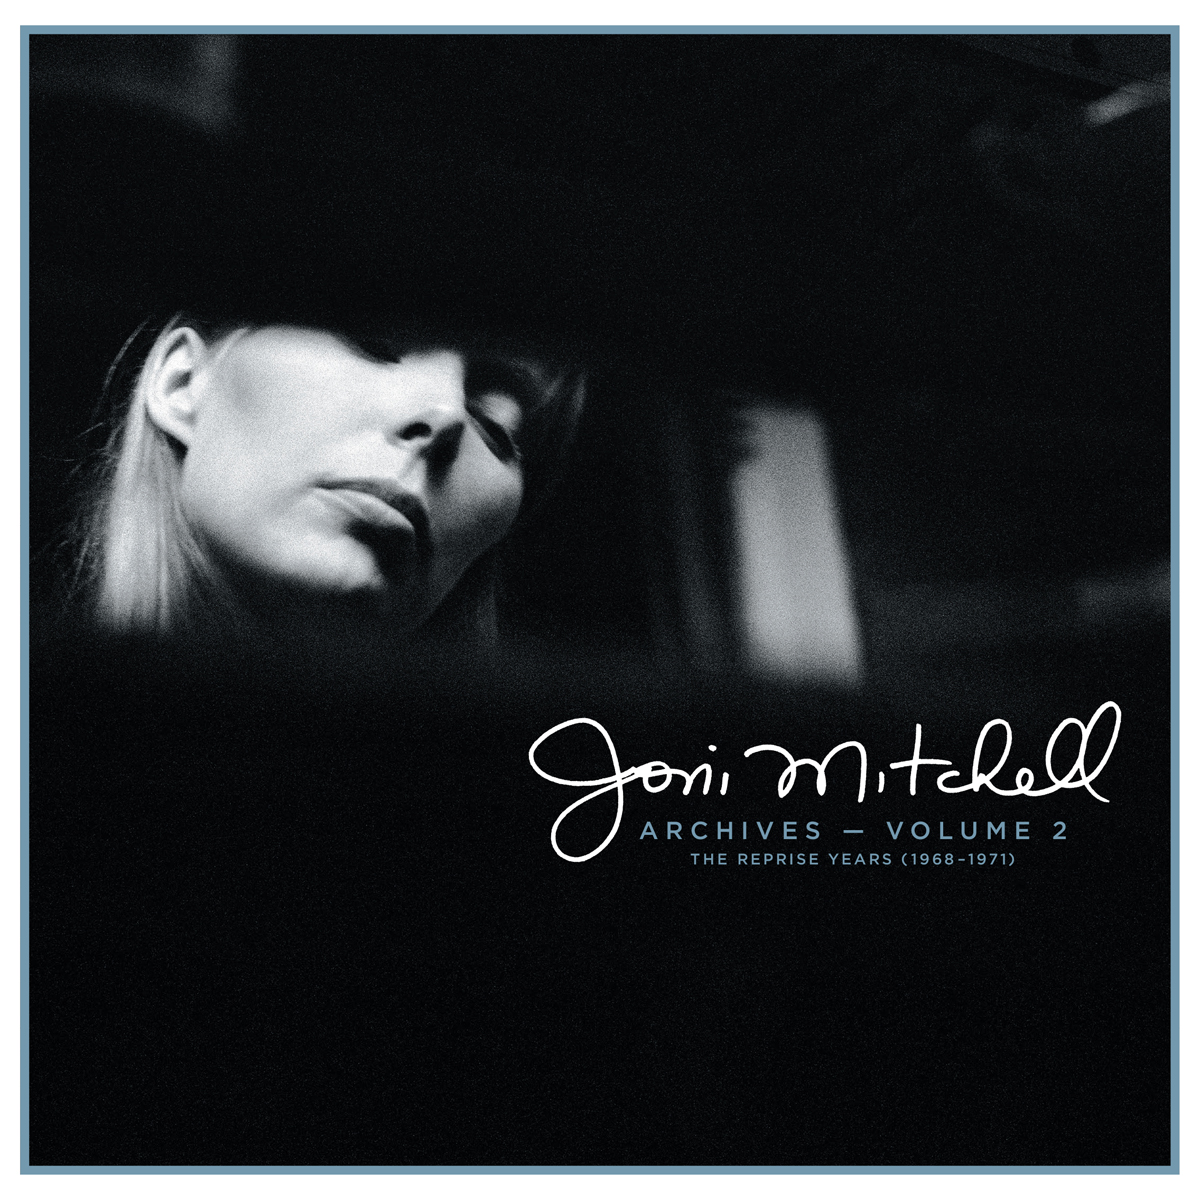 Joni Mitchell “Archives, Vol. 2 The Reprise Years (1968-1971)”